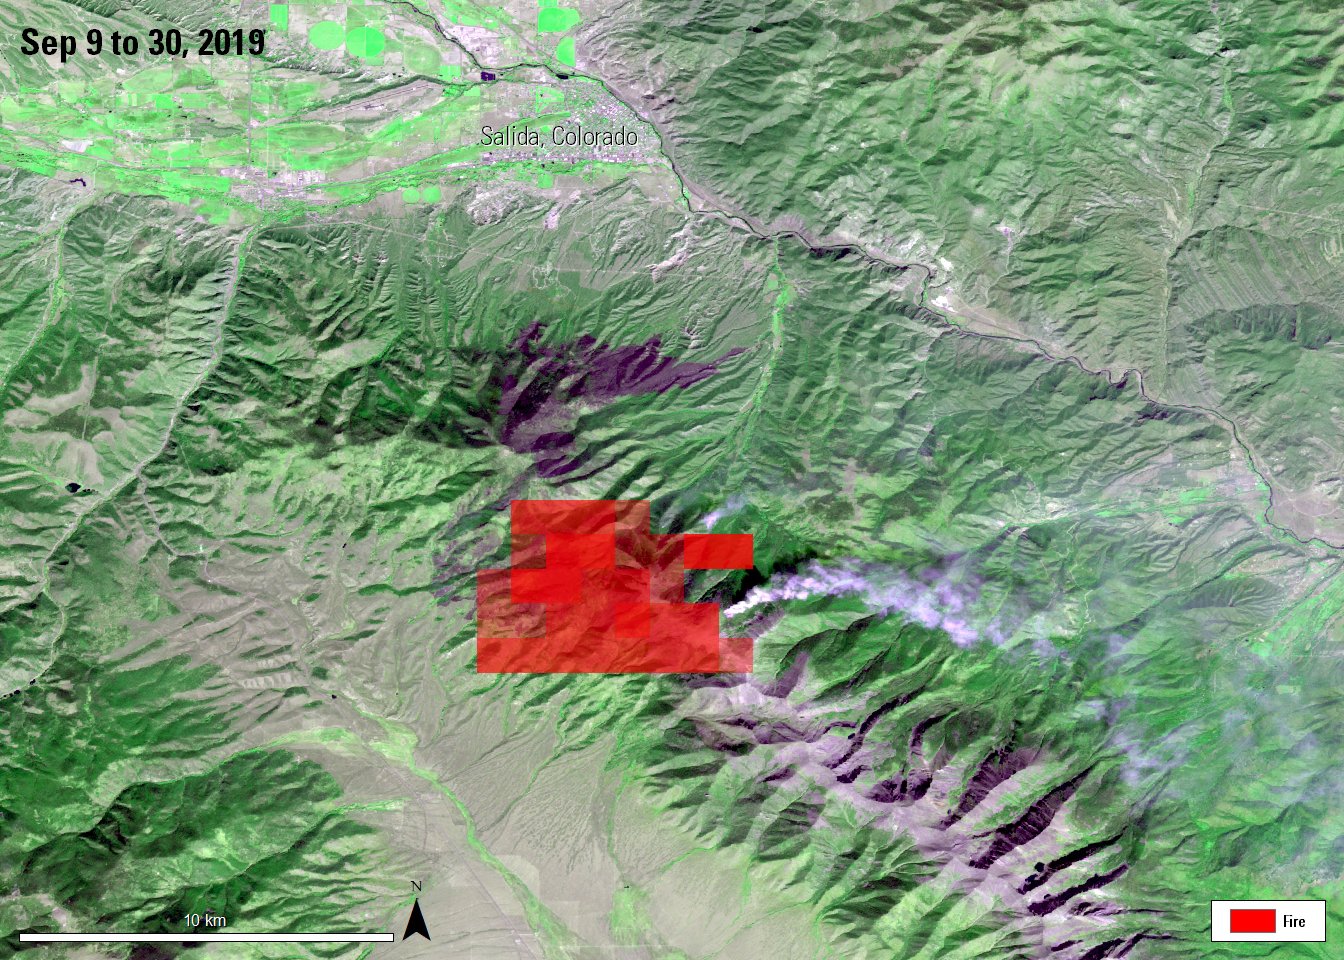 VNP14 products from Sep 9 to Sep 30, 2019 overlaid on AST_L1T image of Decker Fire near Salida, Colorado, acquired on October 12, 2019.